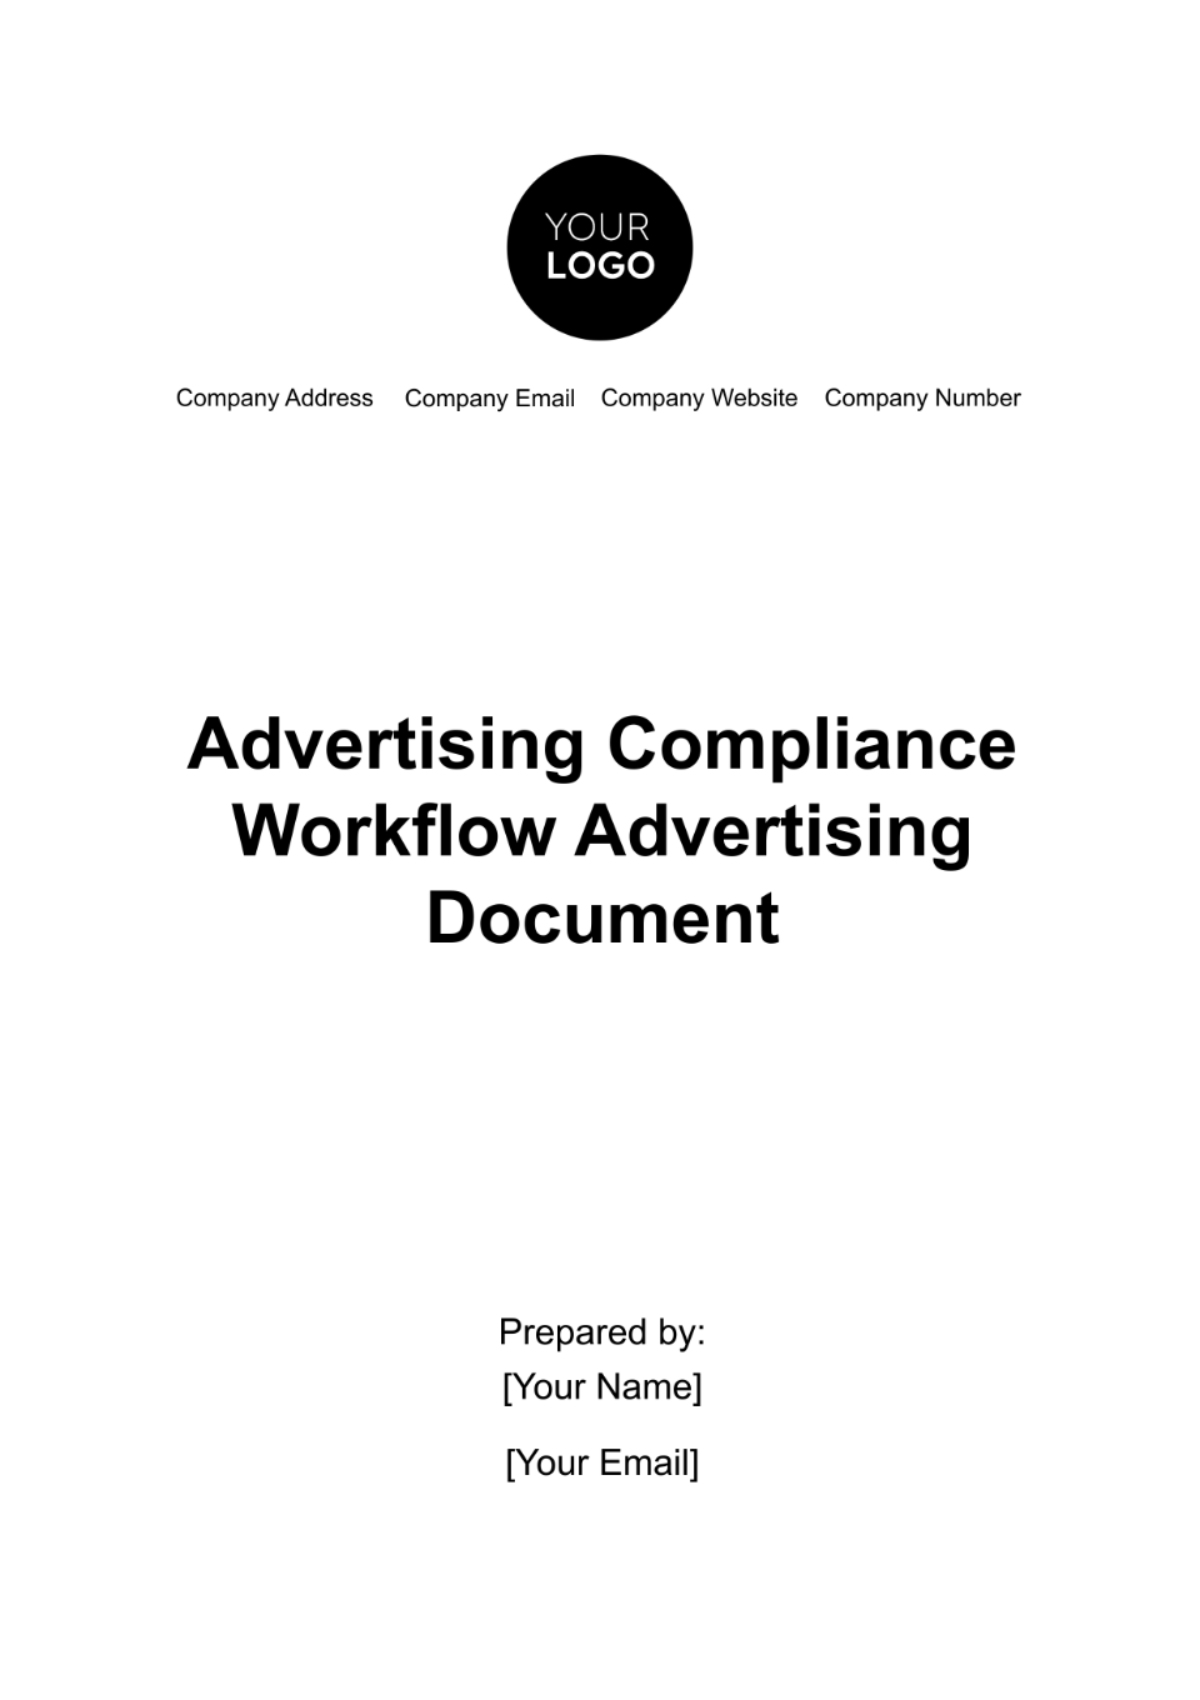 Free Advertising Compliance Workflow Document Template